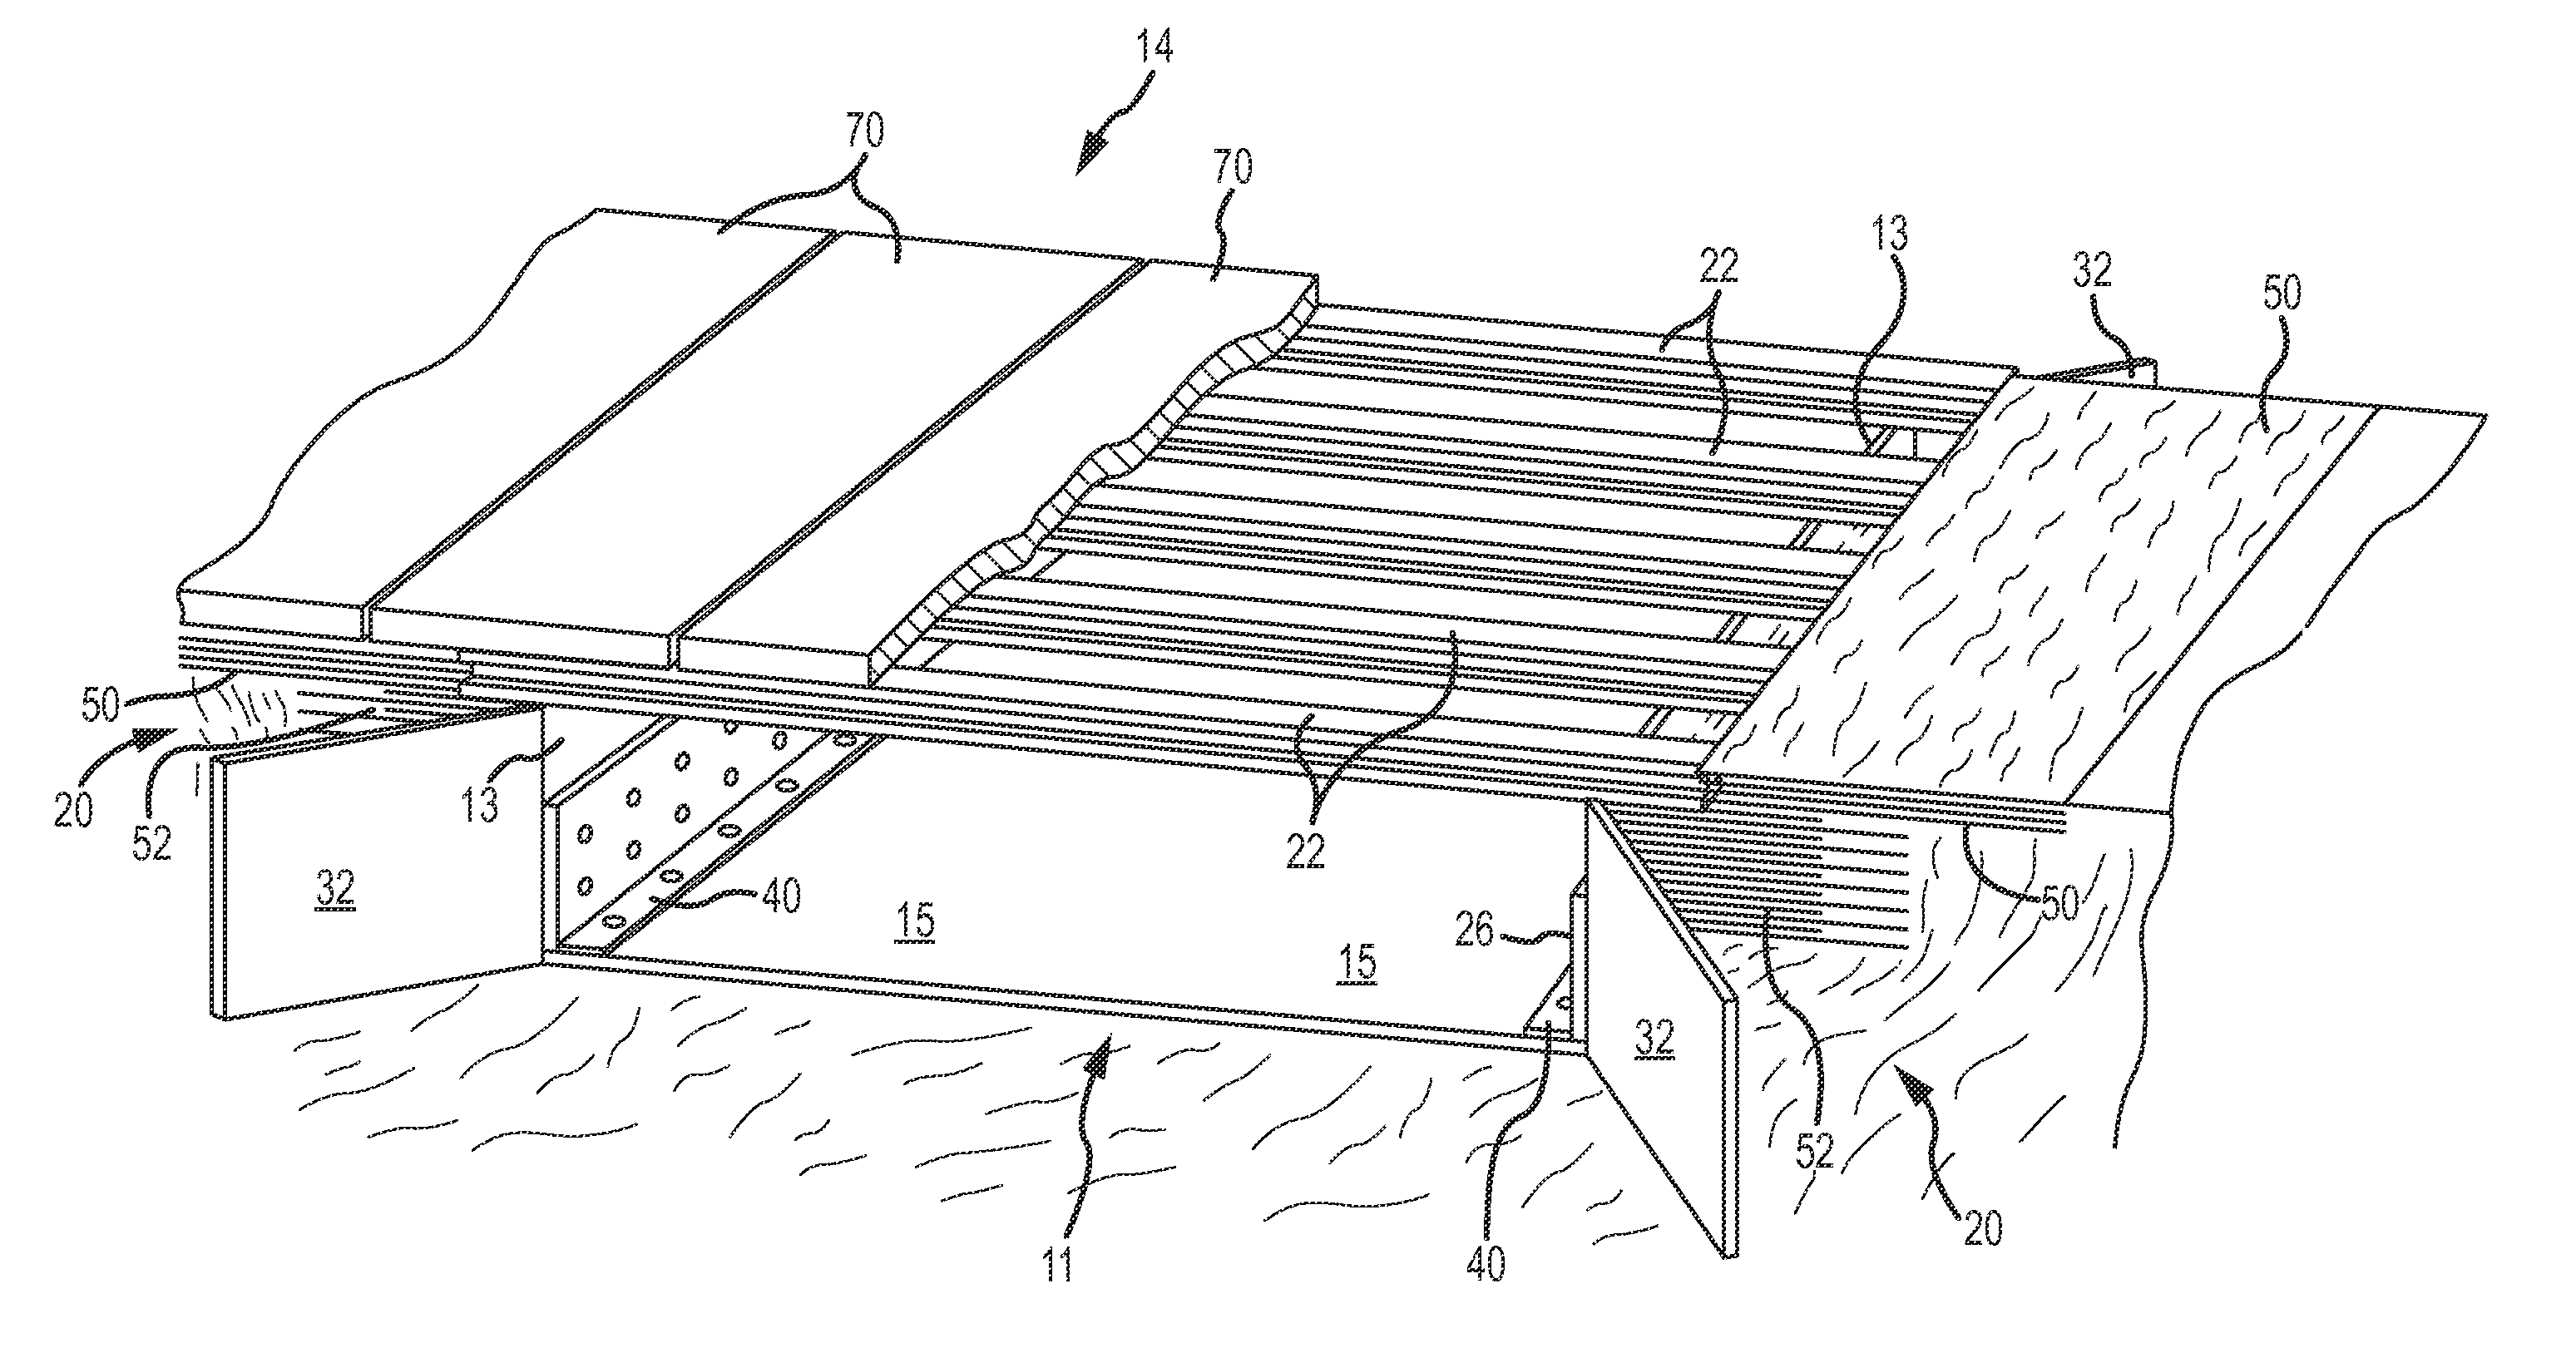 System and method for repair of bridge abutment and culvert constructions